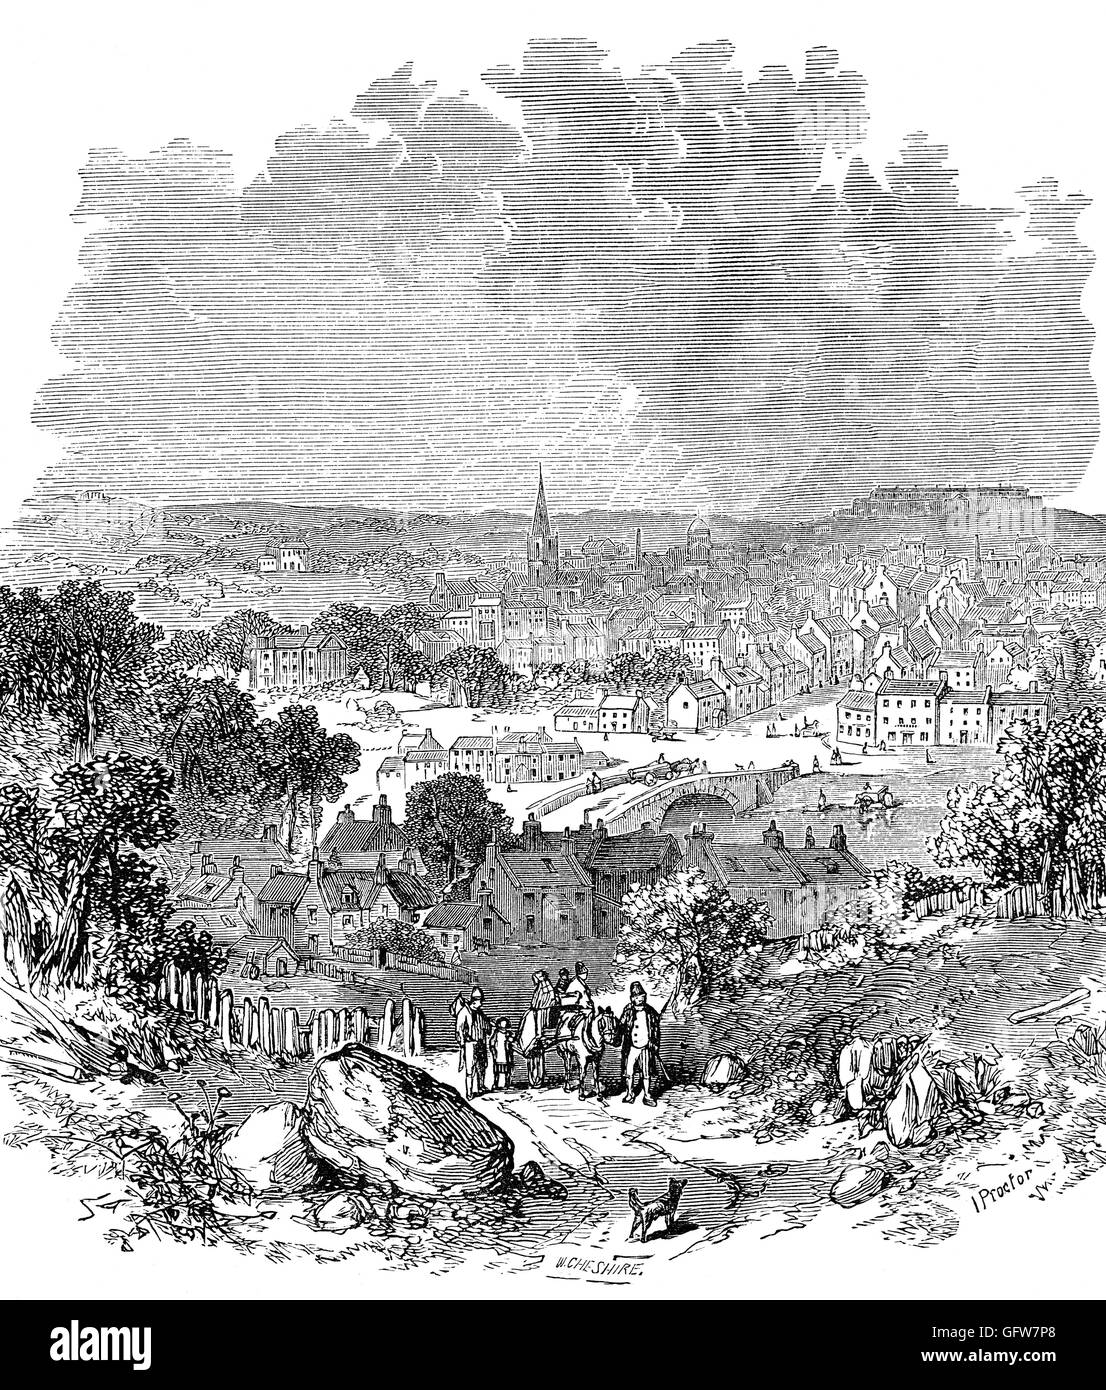 19th Century view of the City Armagh, county town of County Armagh in Northern Ireland, as well as a civil parish. It is the ecclesiastical capital of Ireland – the seat of the Archbishops of Armagh, the Primates of All Ireland for both the Roman Catholic Church and the Church of Ireland. Stock Photo